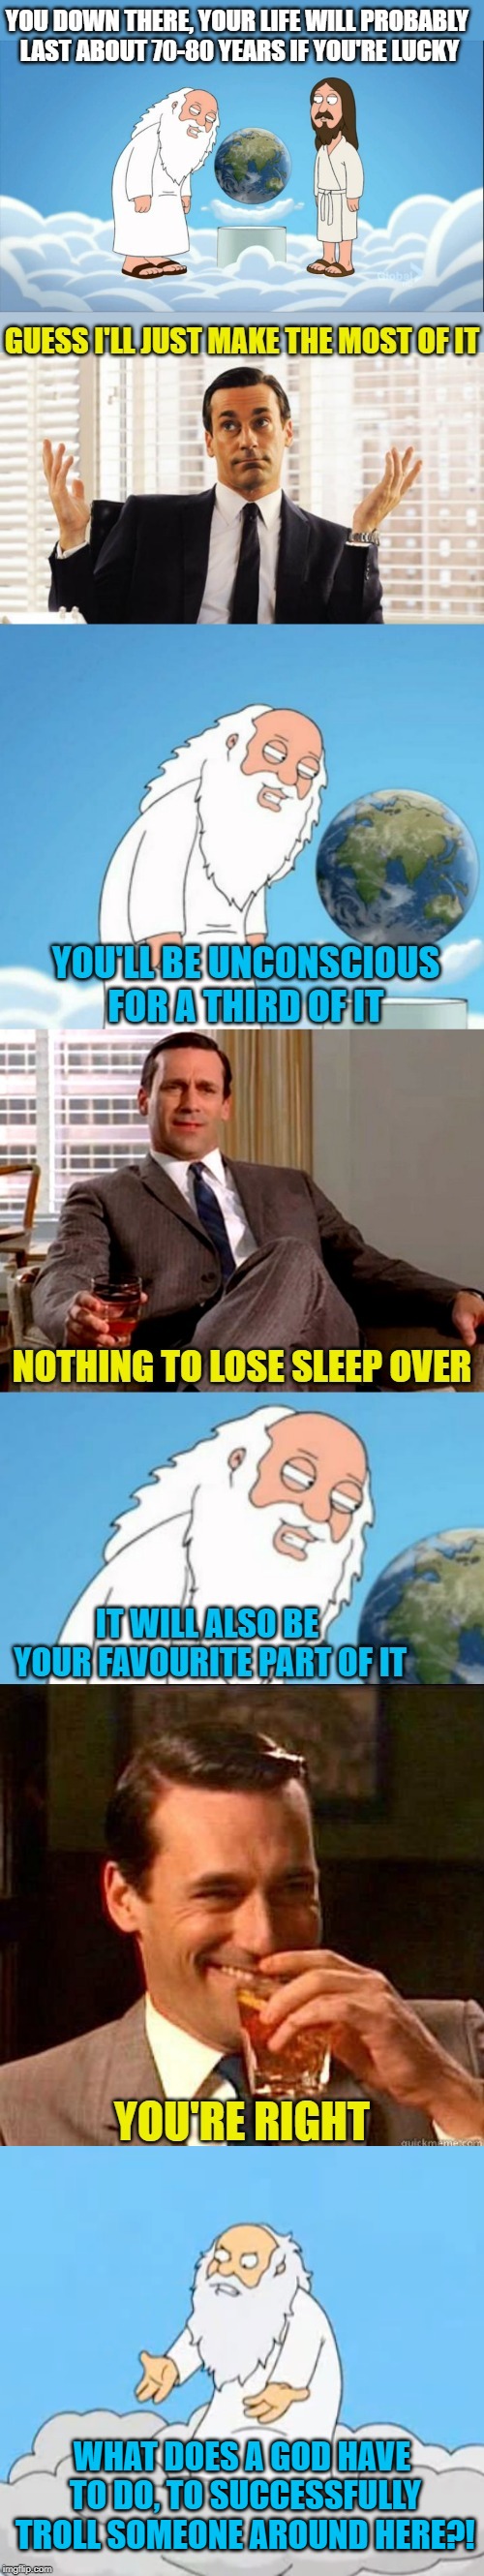 God vs Draper | WHAT DOES A GOD HAVE TO DO, TO SUCCESSFULLY TROLL SOMEONE AROUND HERE?! | image tagged in god,trolling,don draper,shrugs,jokes,laughs | made w/ Imgflip meme maker